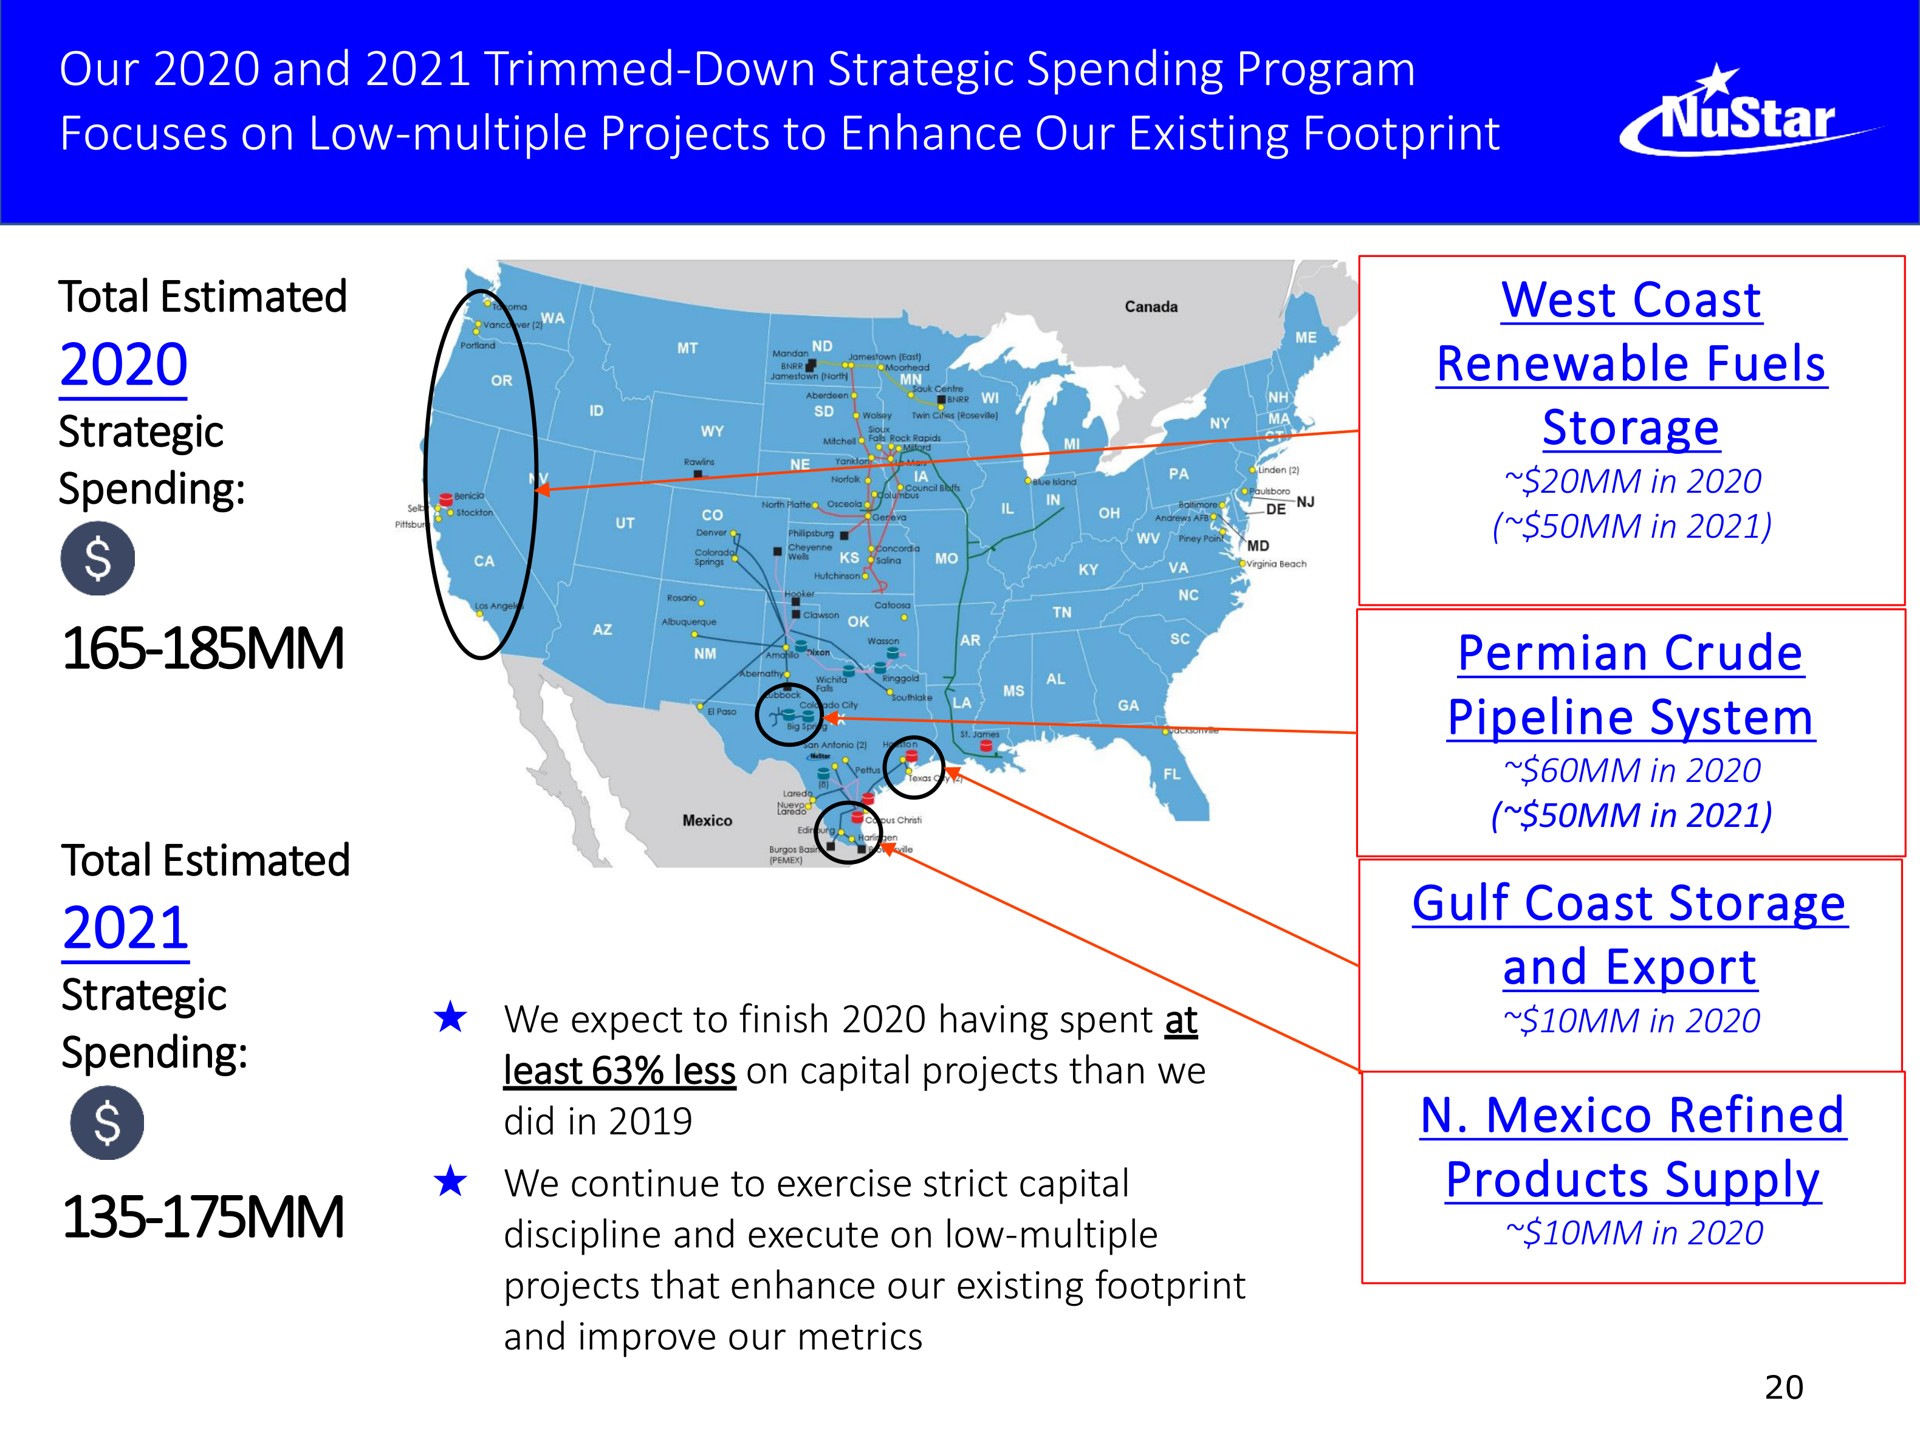 our and trimmed down strategic spending program focuses on low multiple projects to enhance our existing footprint west coast renewable fuels storage crude pipeline system gulf coast storage and export refined products supply | NuStar Energy